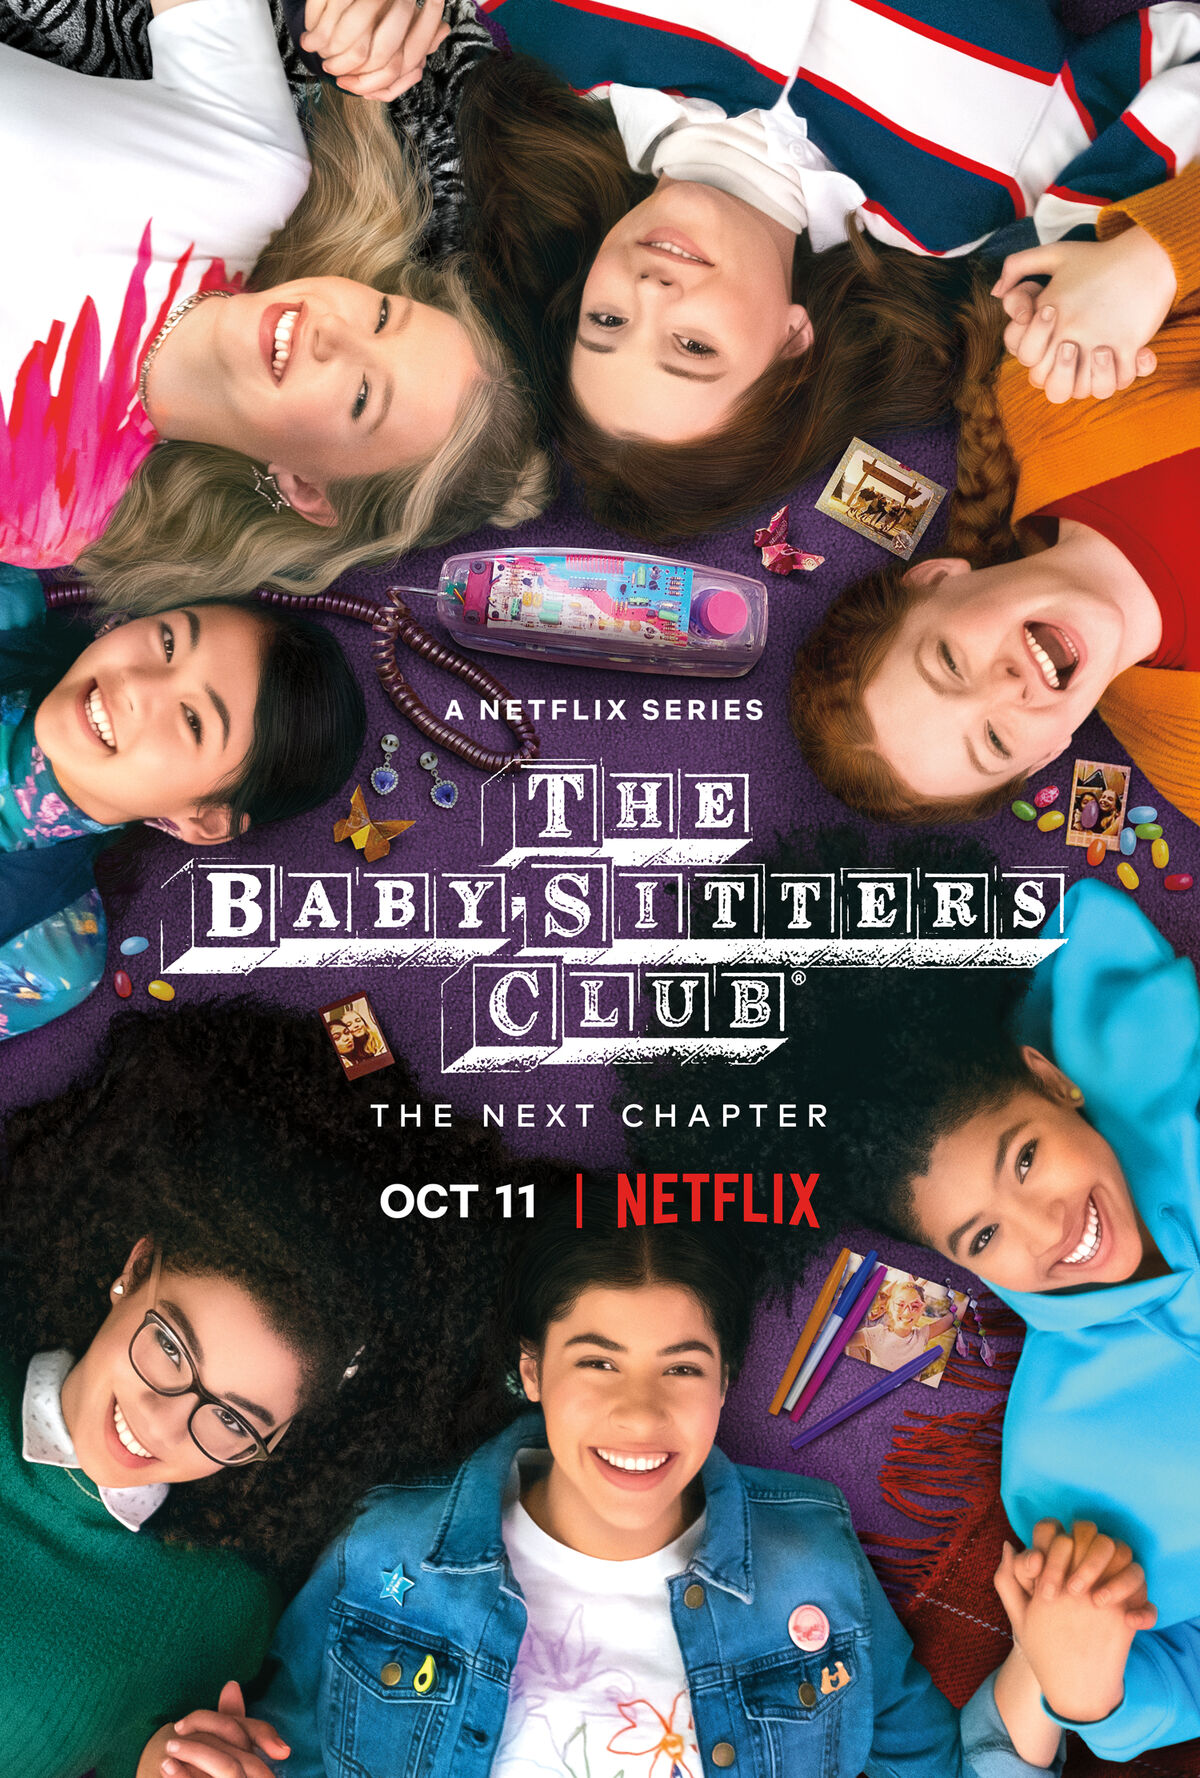 Baby-Sitters Club Director on Reinventing the Series, Possible